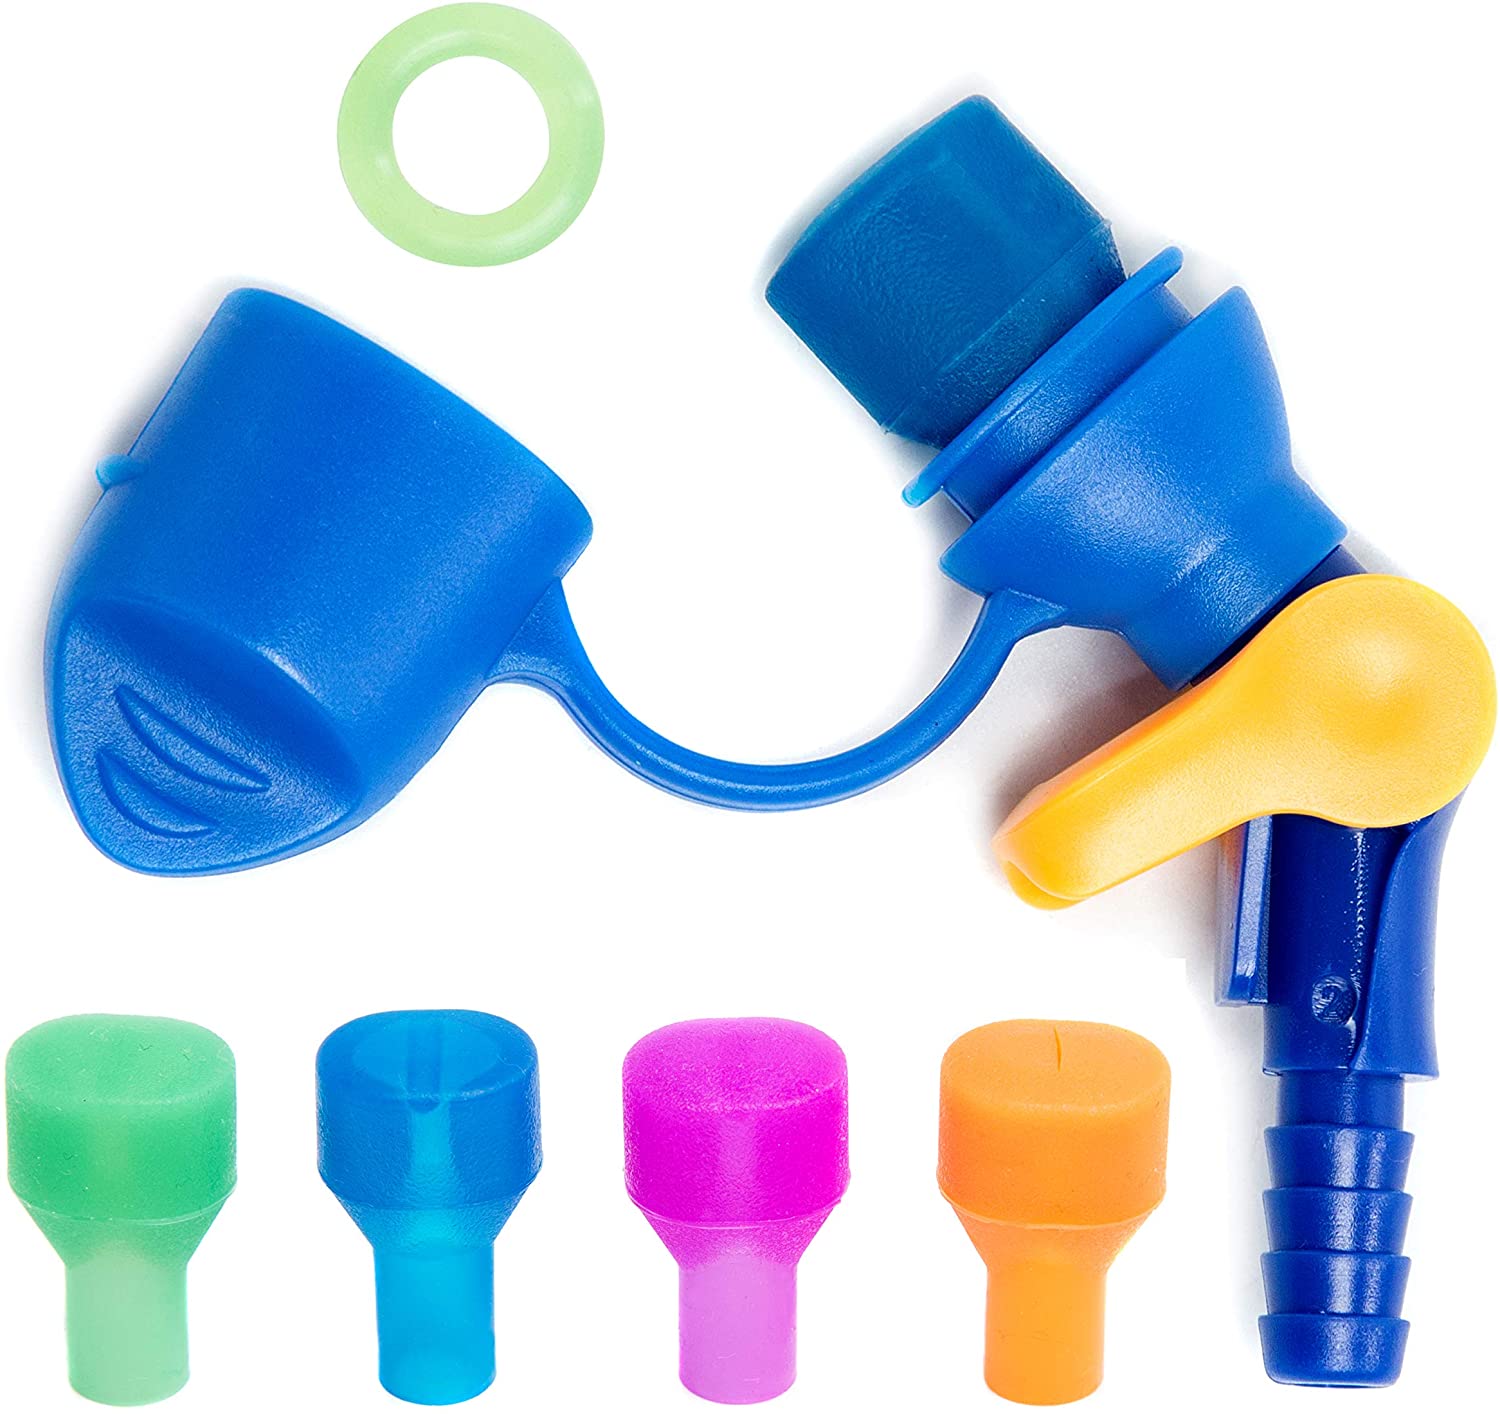 Bite Valve Replacement Mouthpieces for Hydration Pack Bladder, Fit